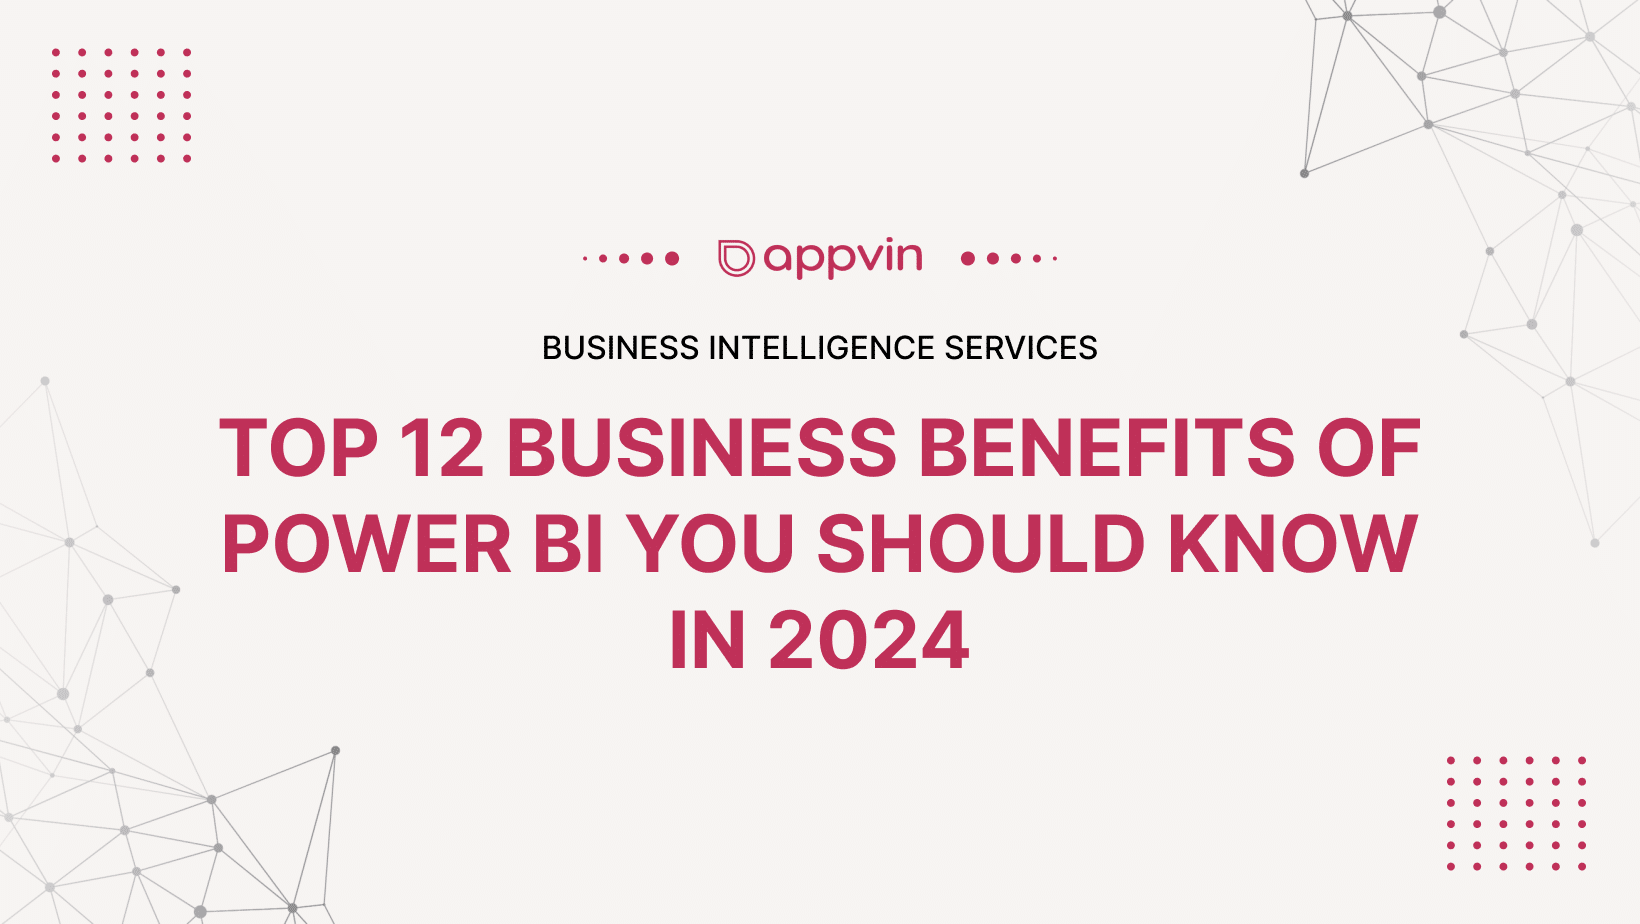 Top 12 Business Benefits of Power BI You Should Know in 2024